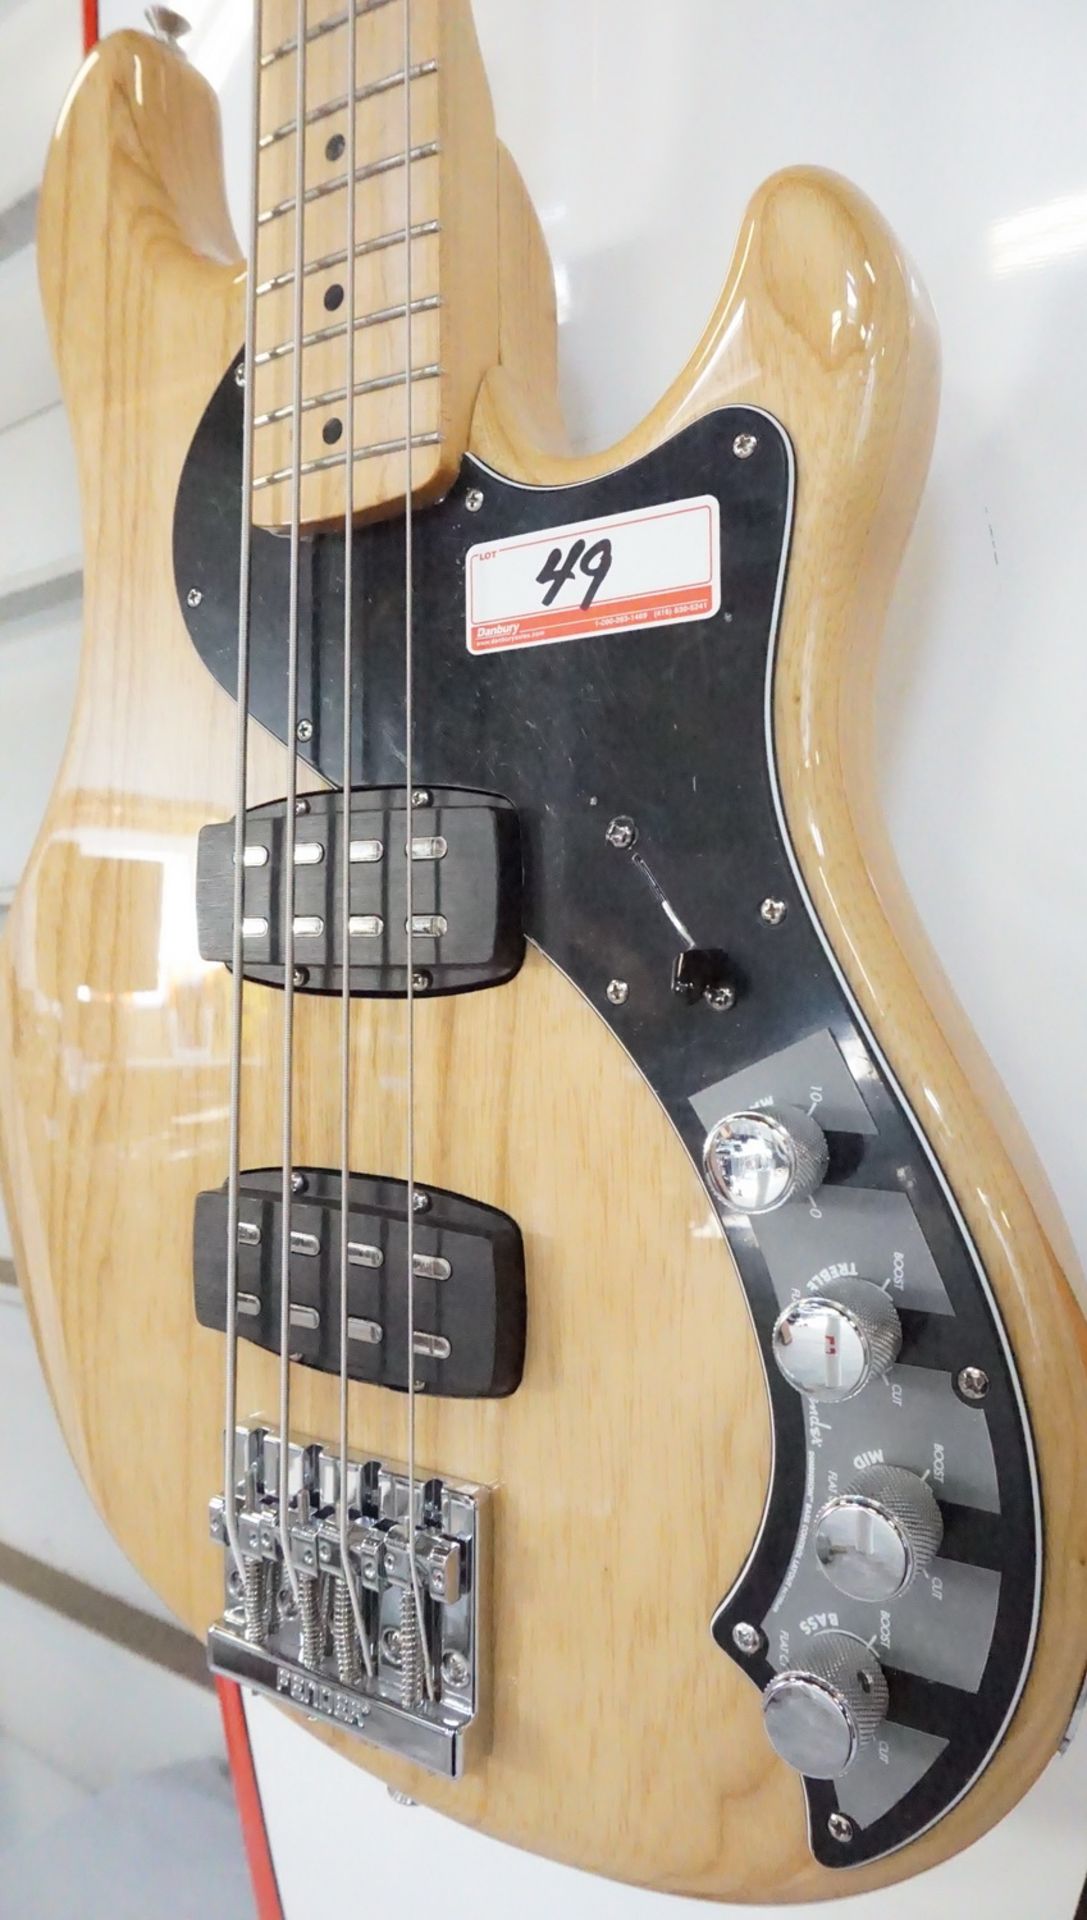 FENDER DELUXE DIMENSION BASS NATURAL ELECTRIC BASS GUITAR W/ FENDER BLACK SOFT CASE - Image 3 of 8